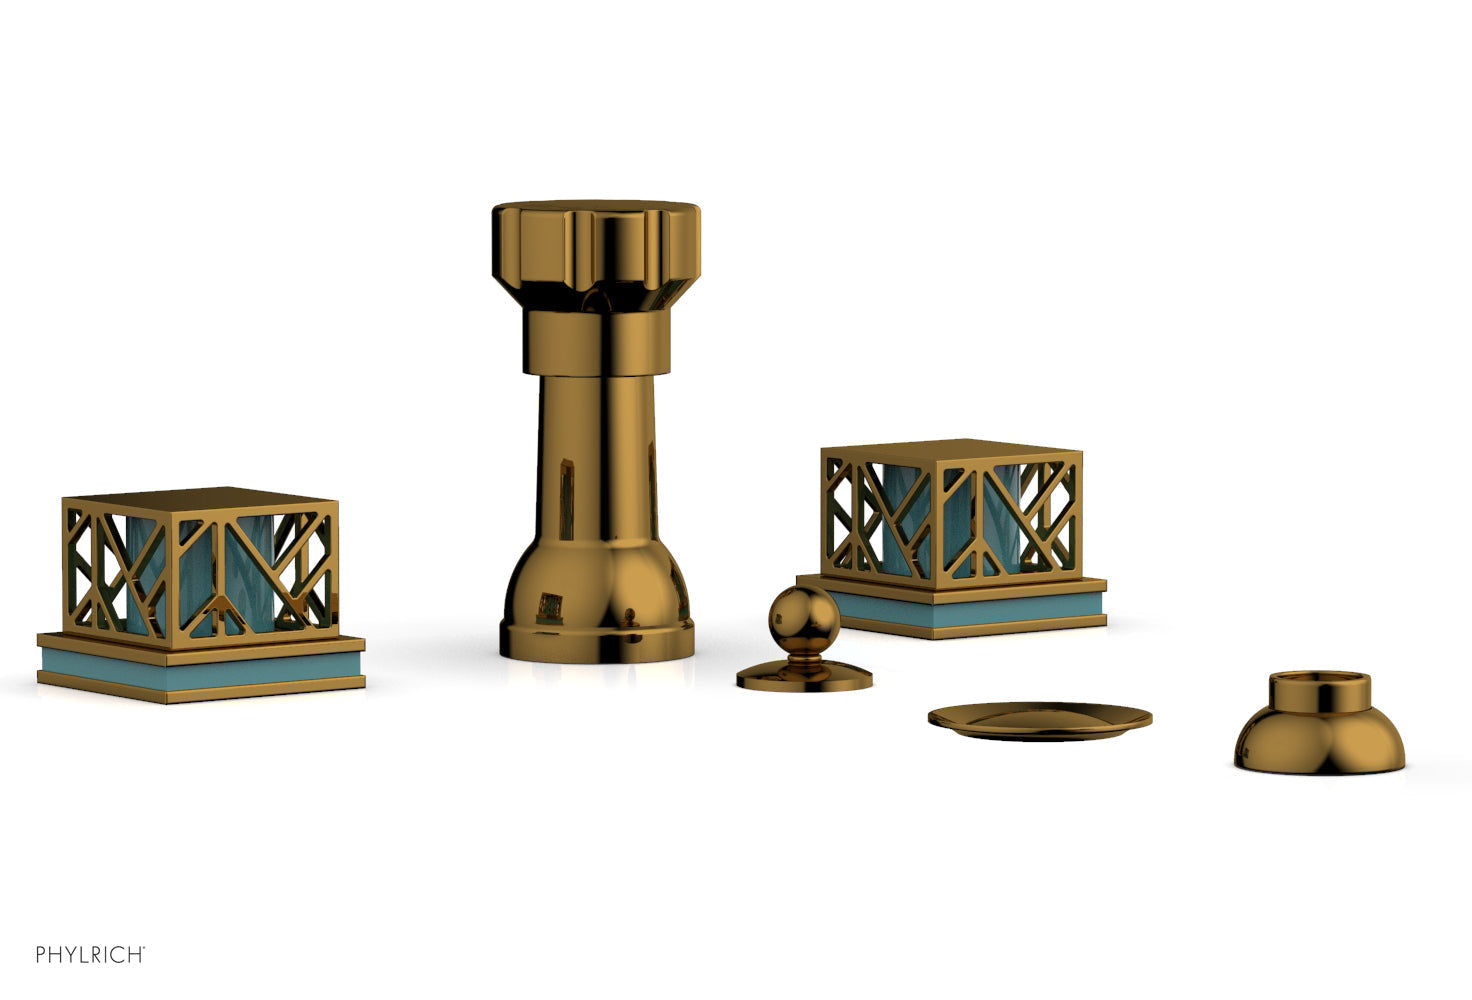 Phylrich JOLIE Four Hole Bidet Set - Square Handles with "Turquoise Accents"